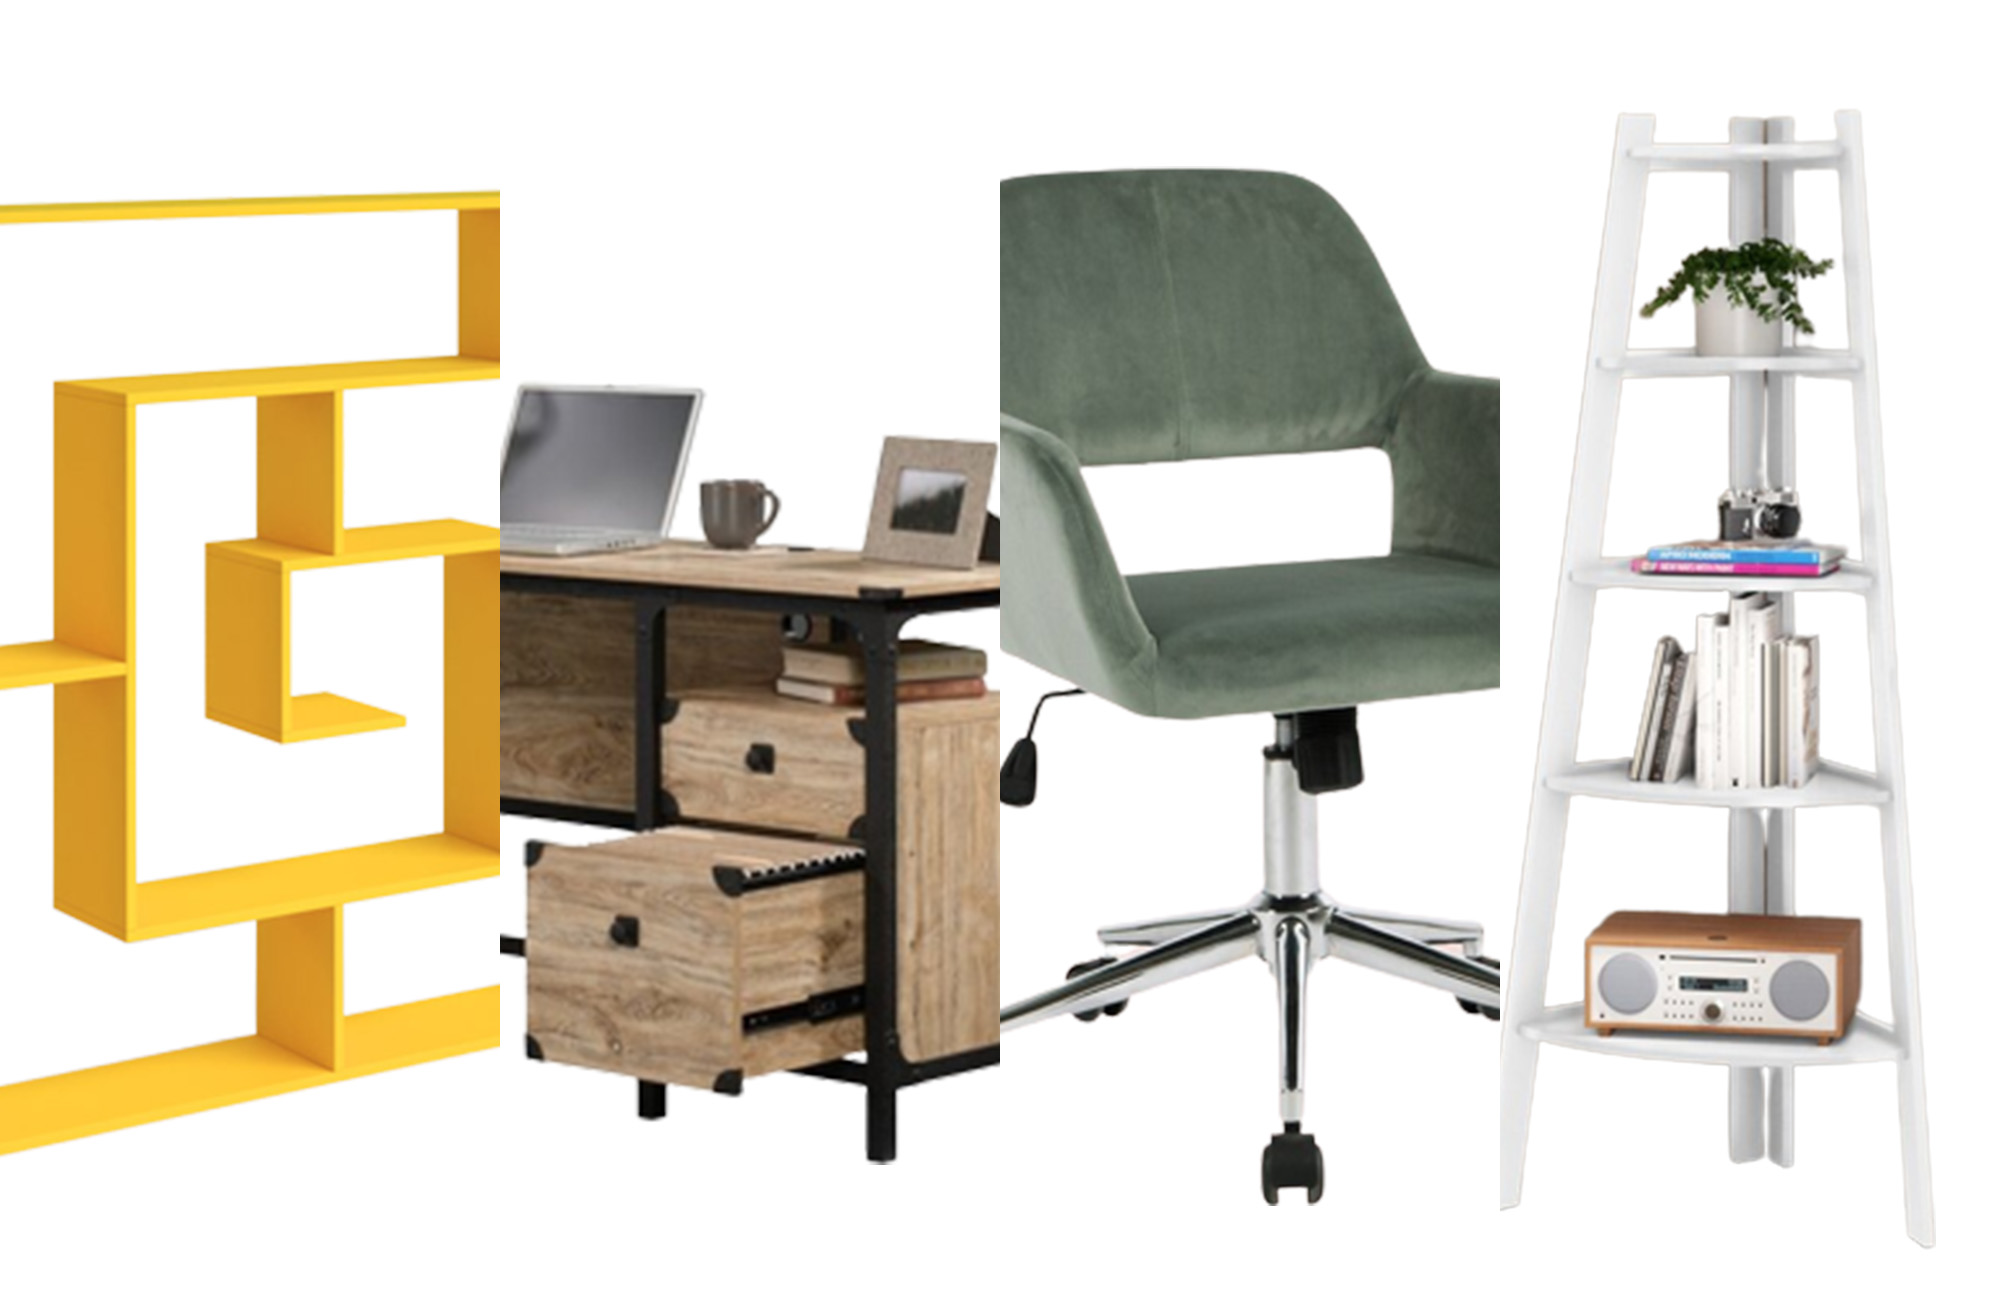 Cyber Monday furniture deals: Revamp your home office with up to 50% off Wayfair furniture